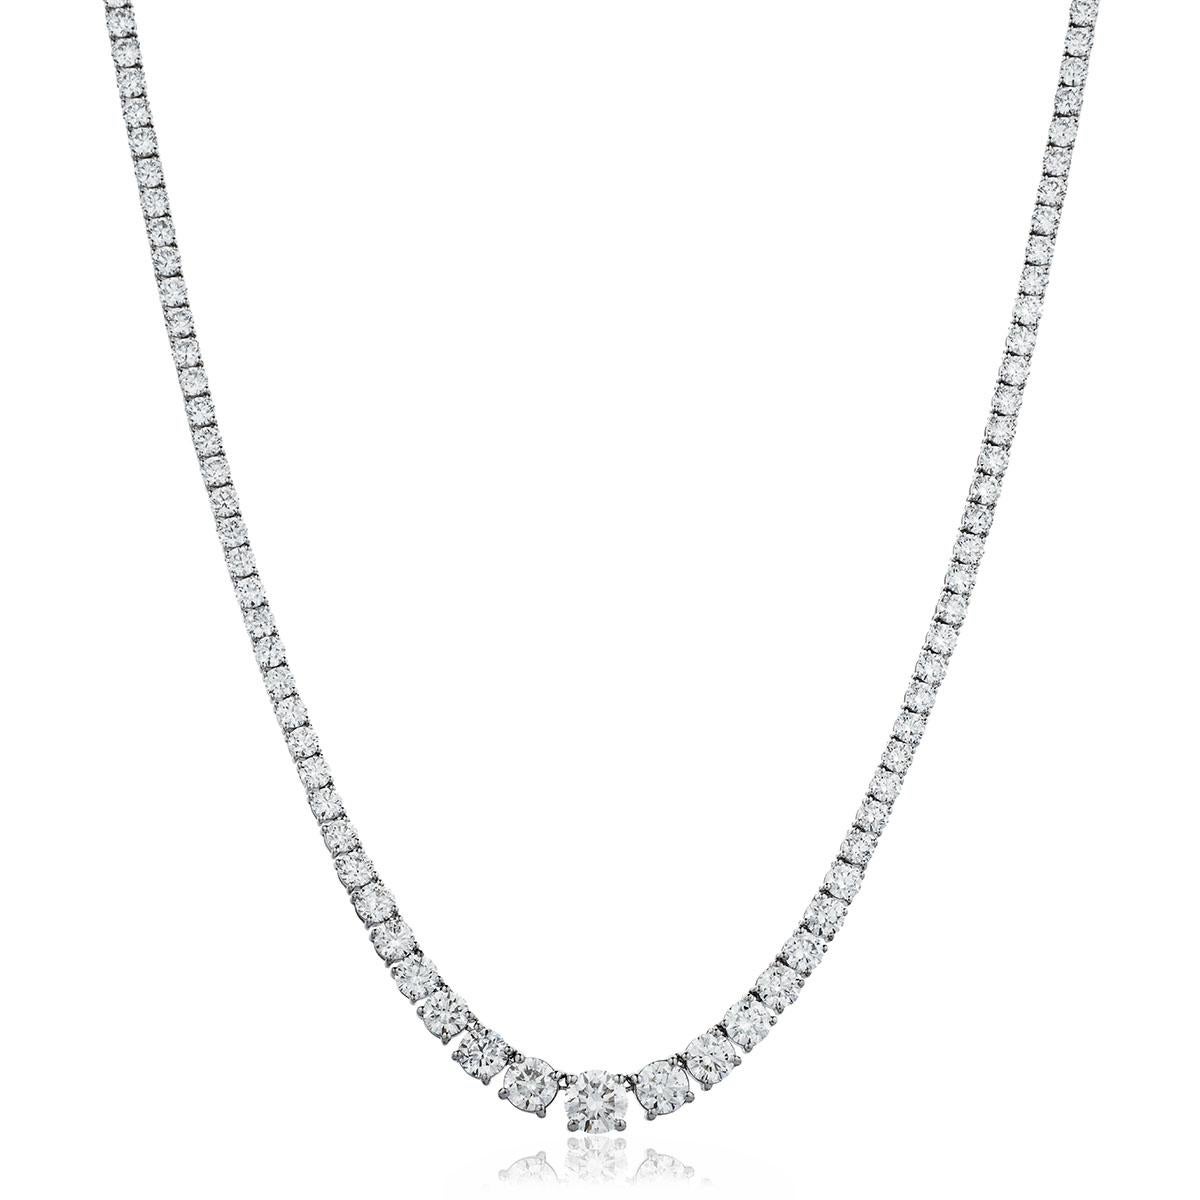 7.40 Carat Diamond Line Necklace 18 Karat White Gold 4 Claws Set Riviera Tennis In New Condition For Sale In London, GB